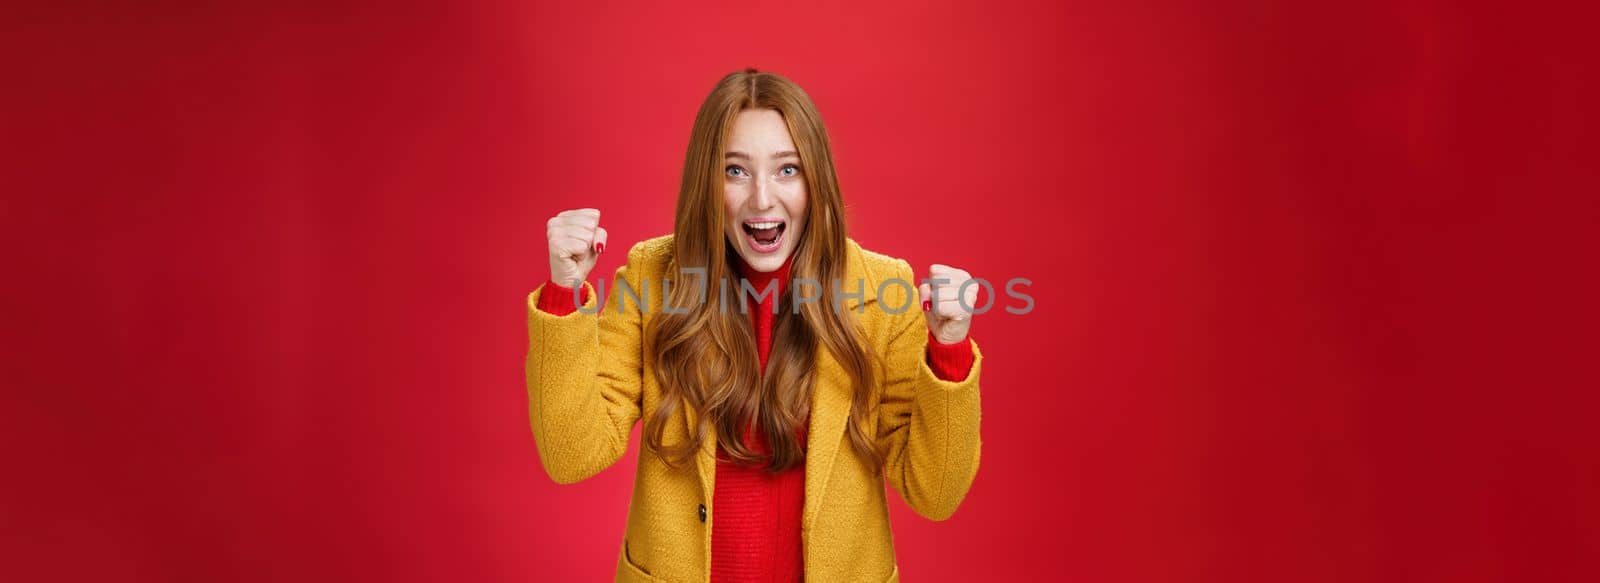 Studio shto of cheerful excited good-looking ginger girl in yellow coat raising clenched fists in joy and happiness, triumphing yelling yes from success and triumph, celebrating win over red wall.